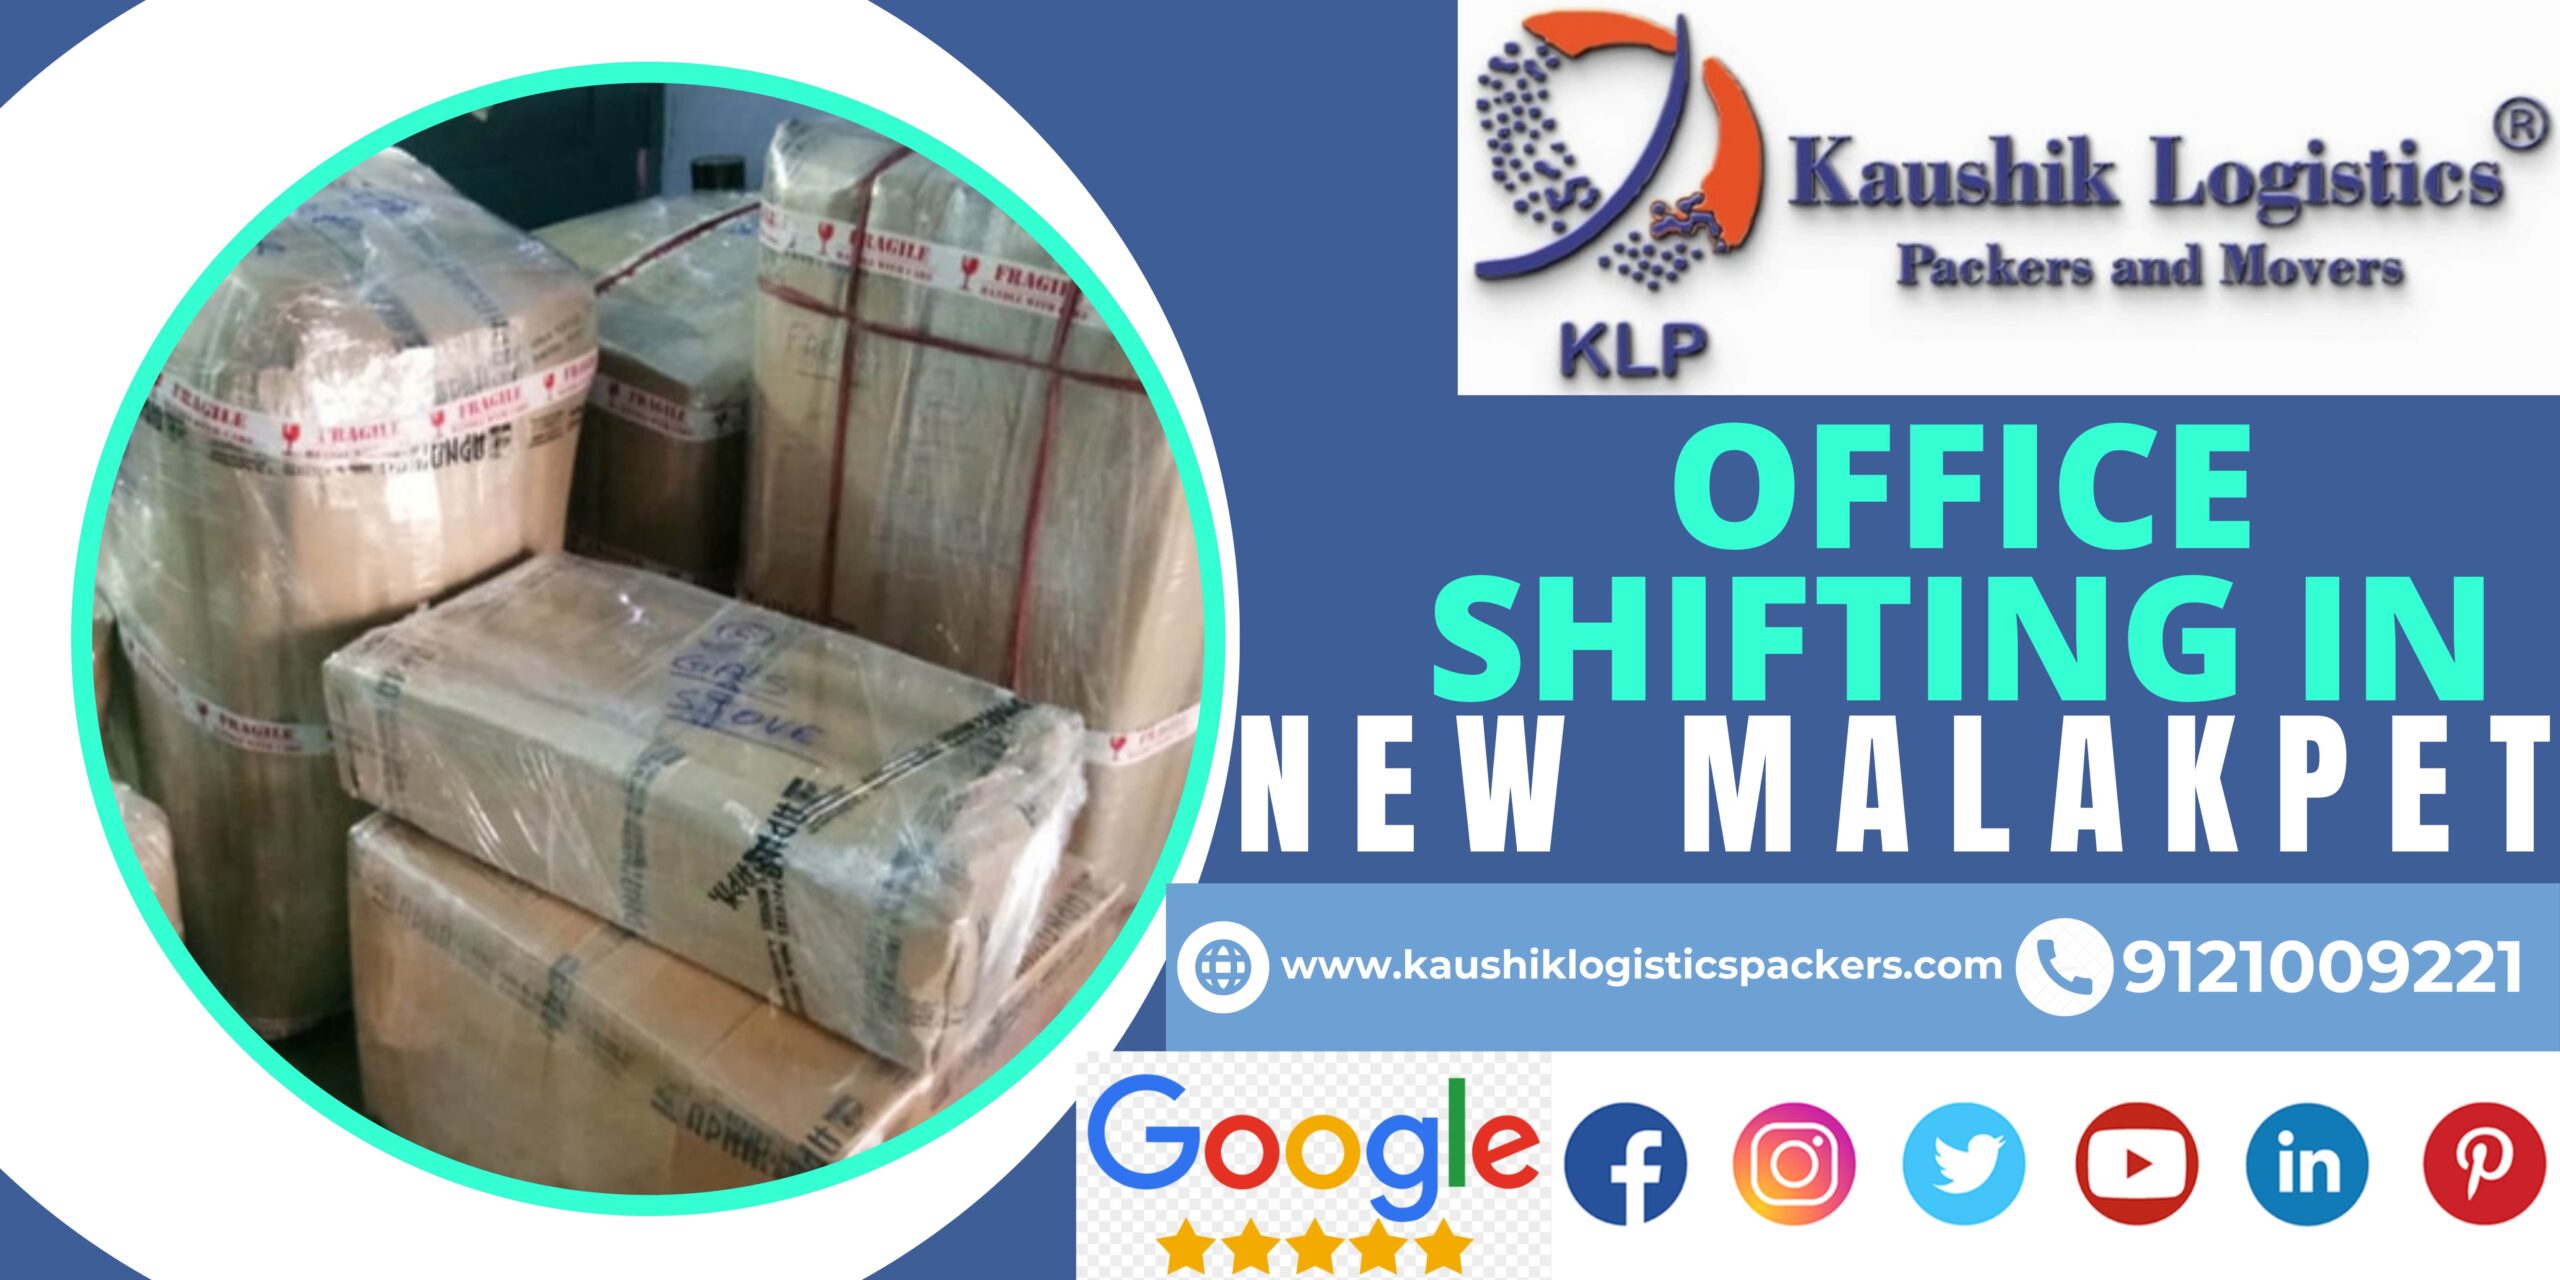 Packers and Movers In New Malakpet